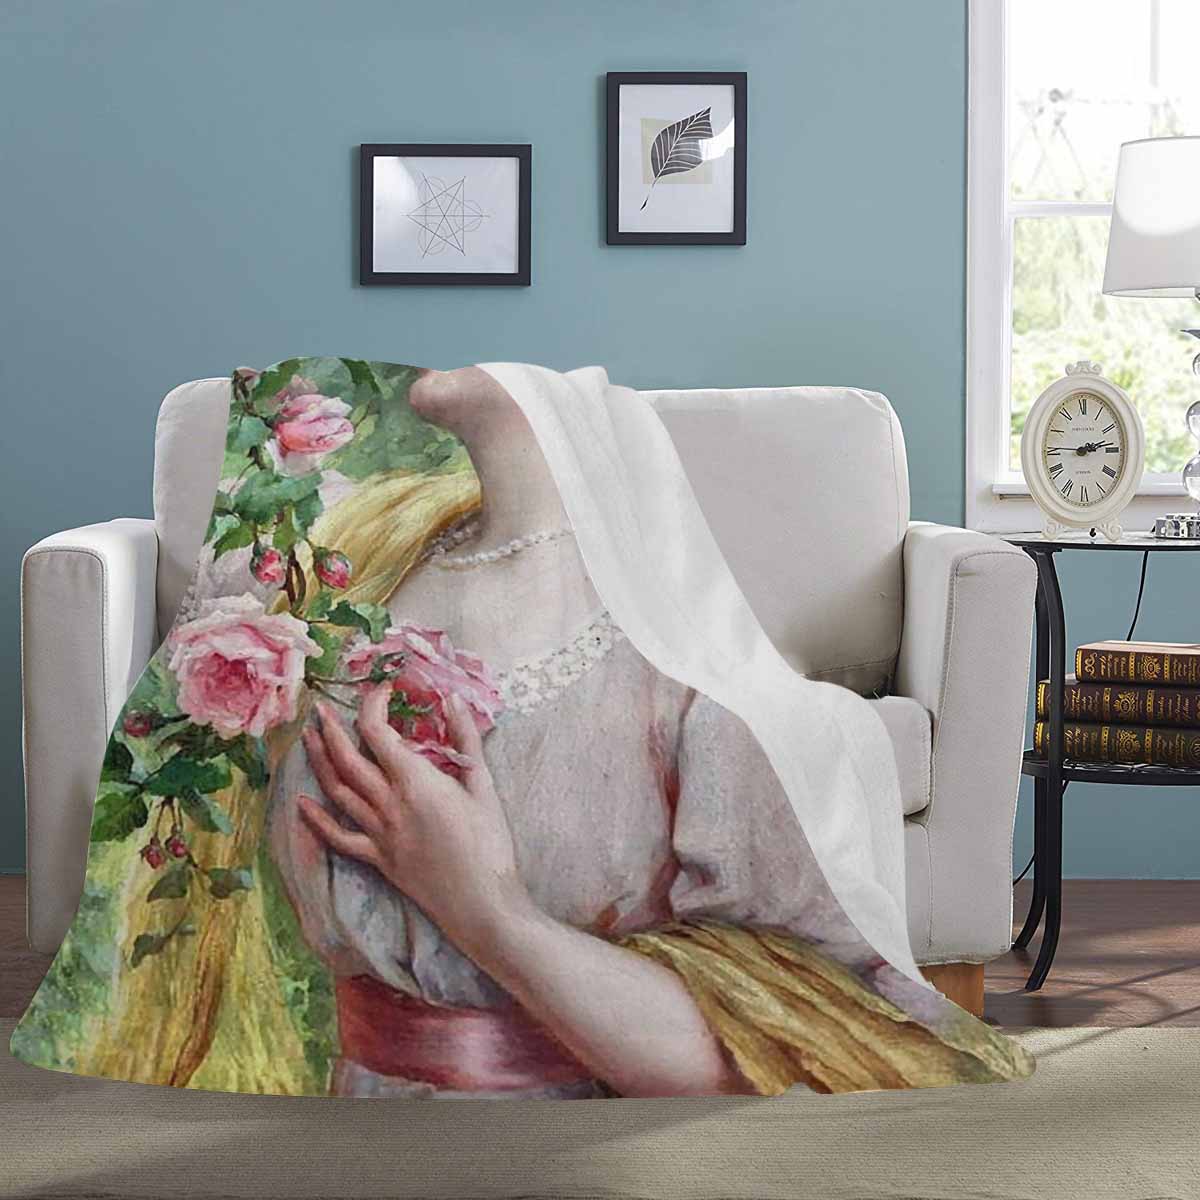 Victorian Lady Design BLANKET, LARGE 60 in x 80 in, Lady Picking Pink Rose